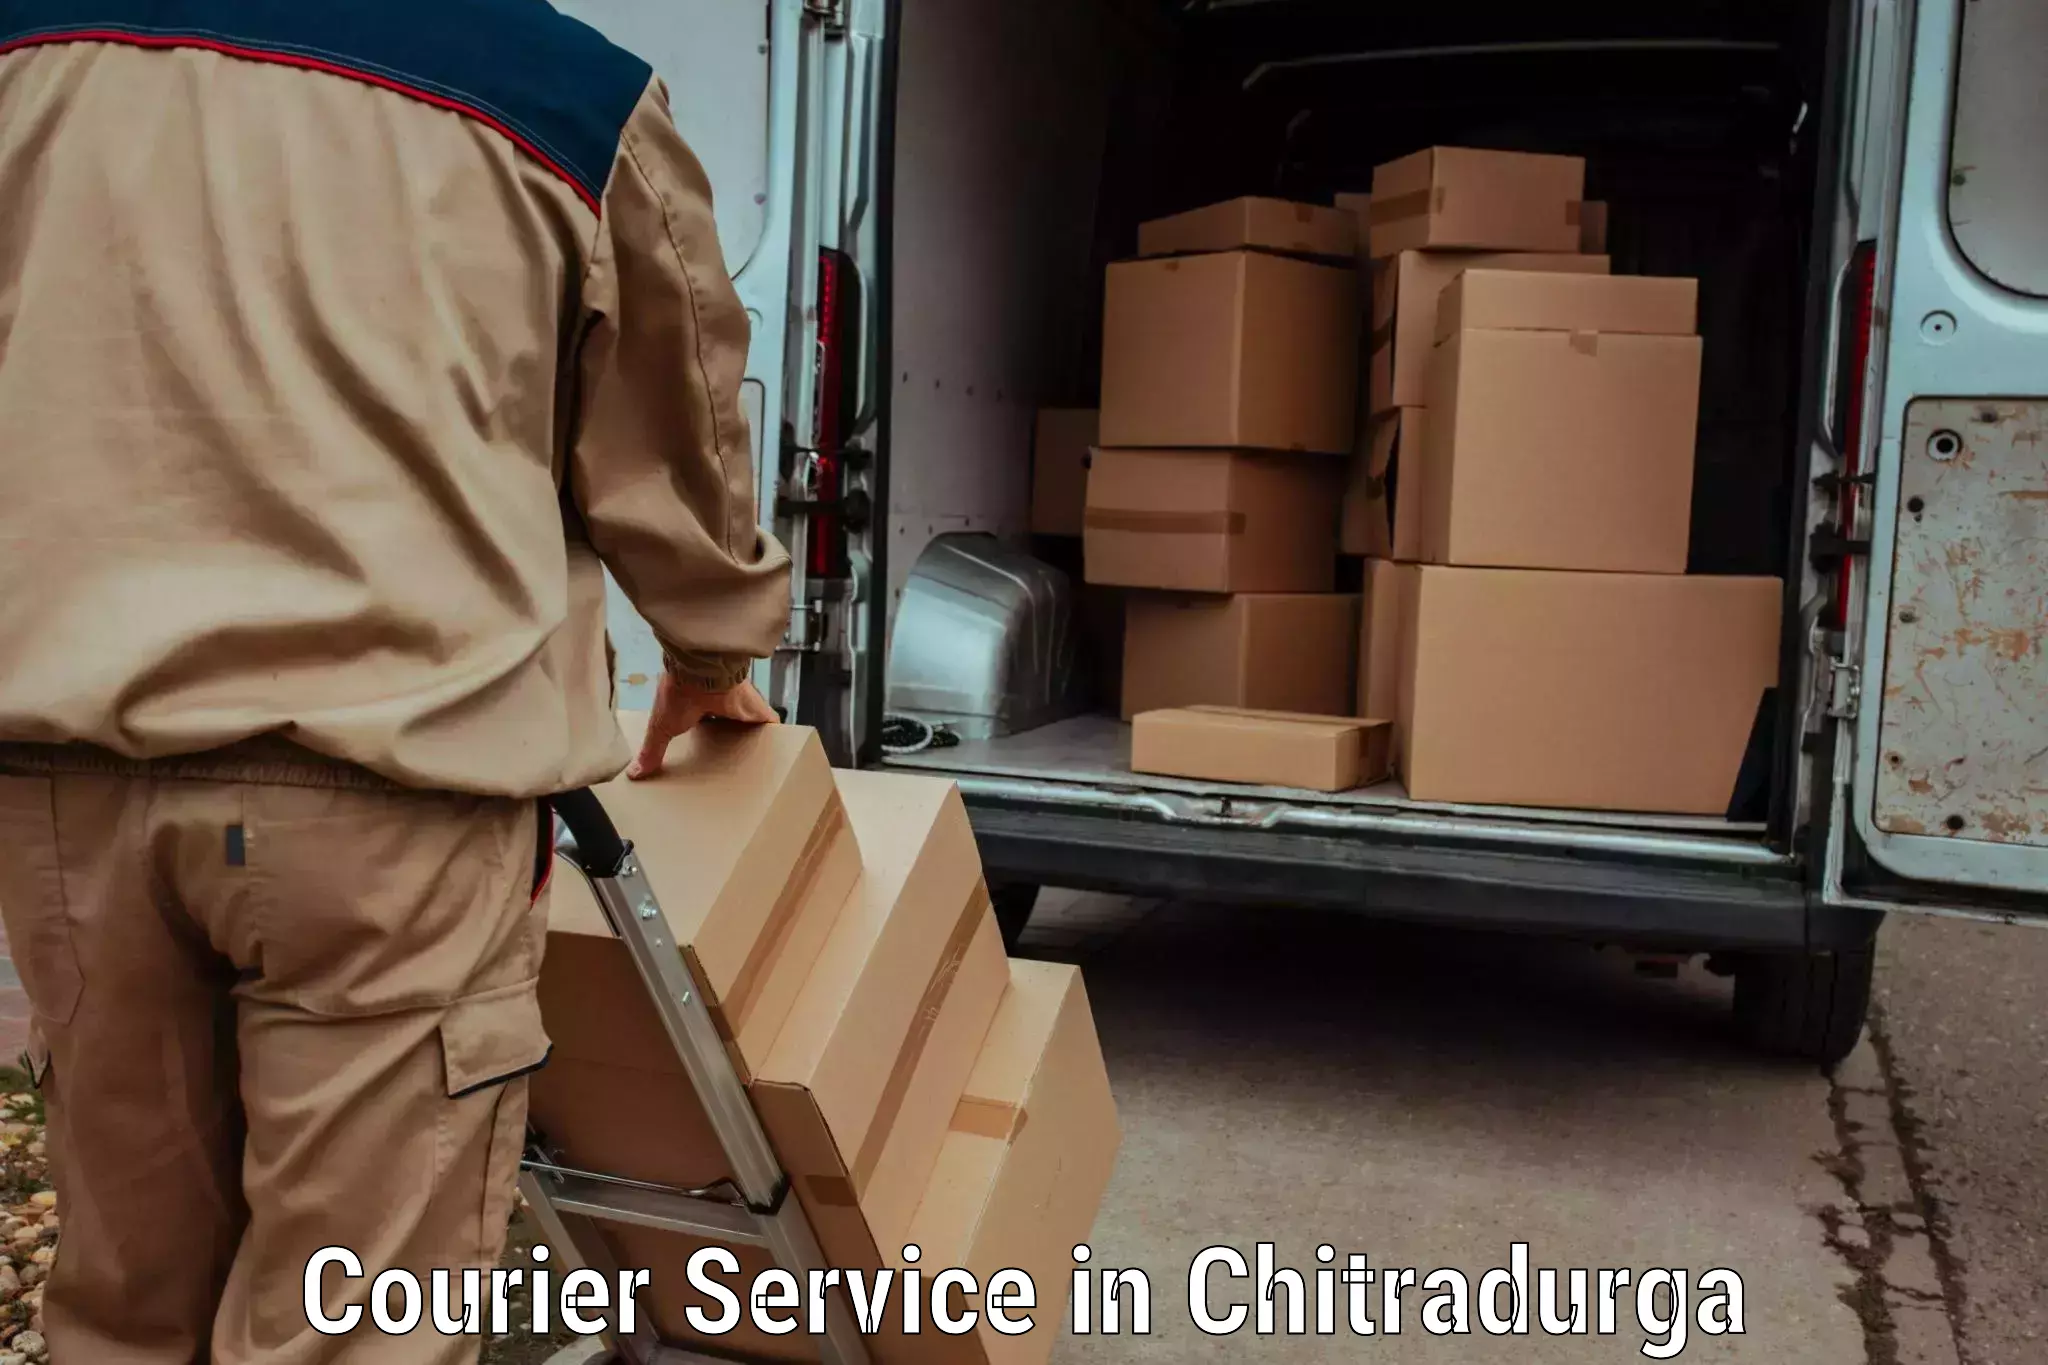 Subscription-based courier in Chitradurga